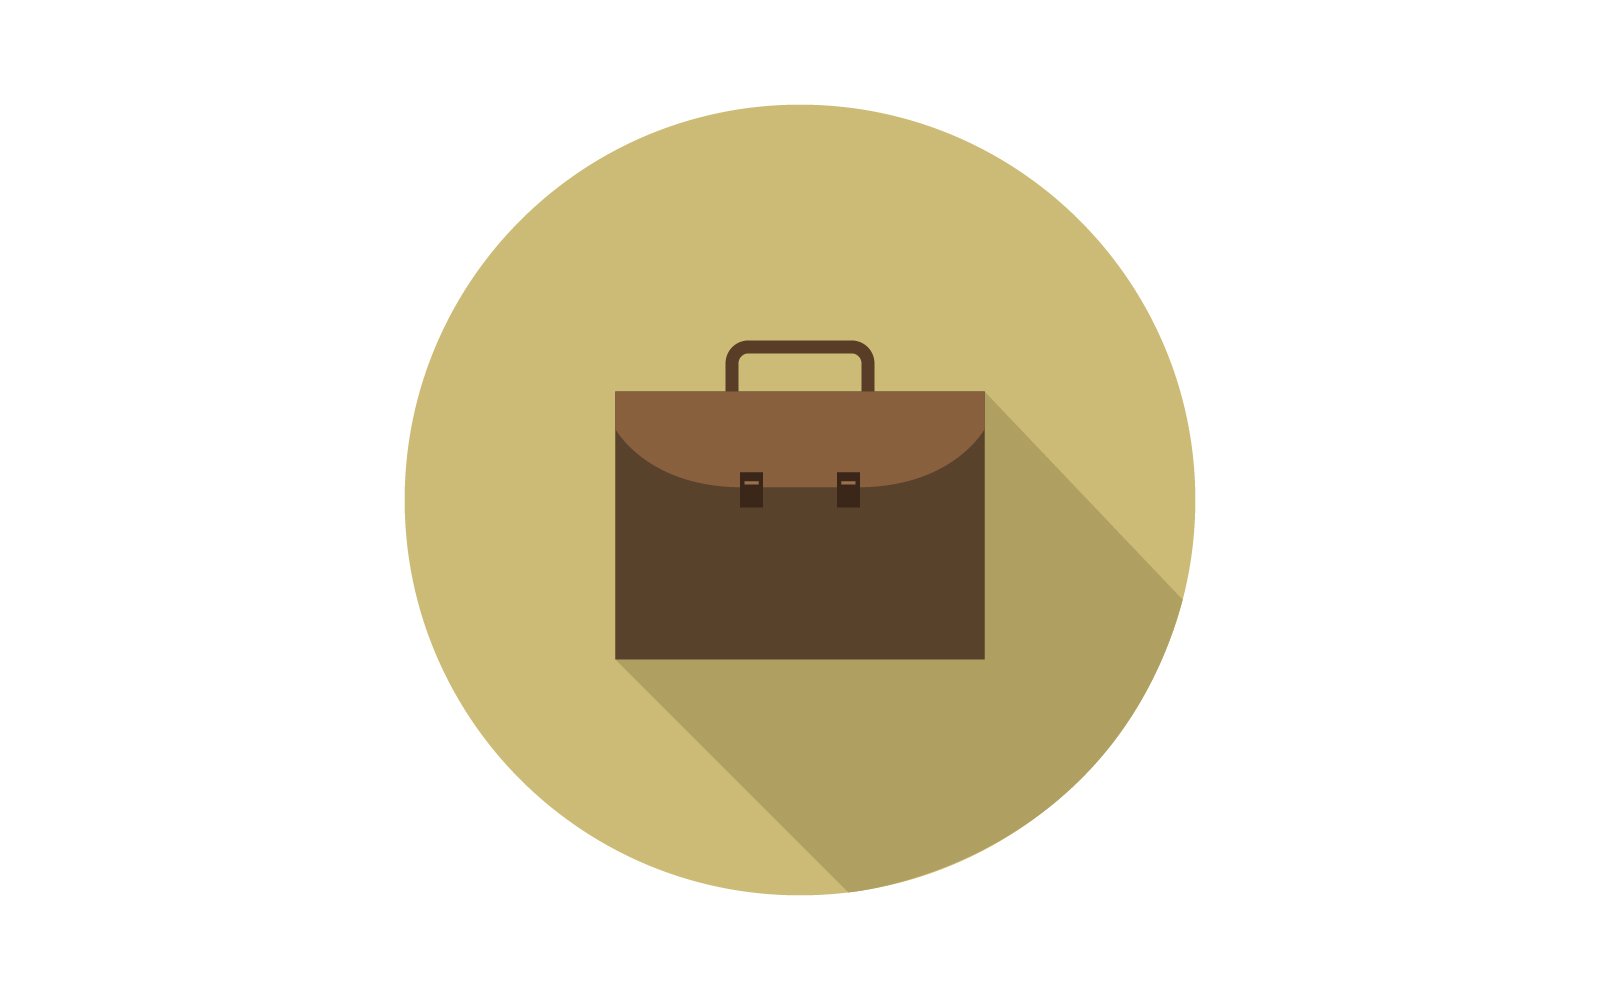 Work suitcase illustrated in vector on background